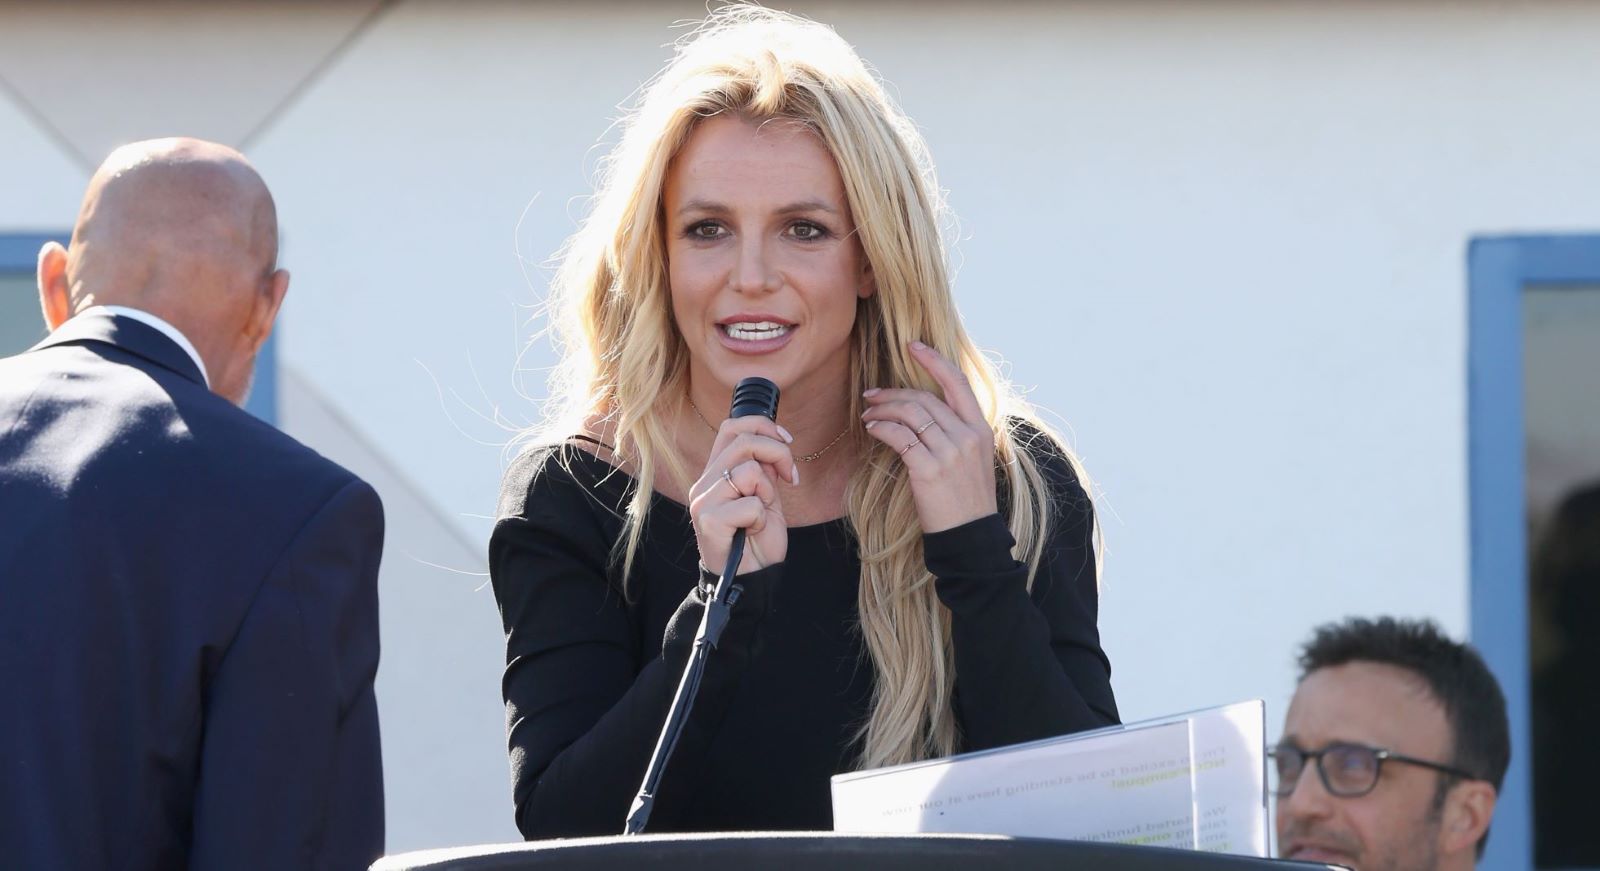 Britney Spears’ book has been delayed because there isn’t enough paper in the world to meet the demand